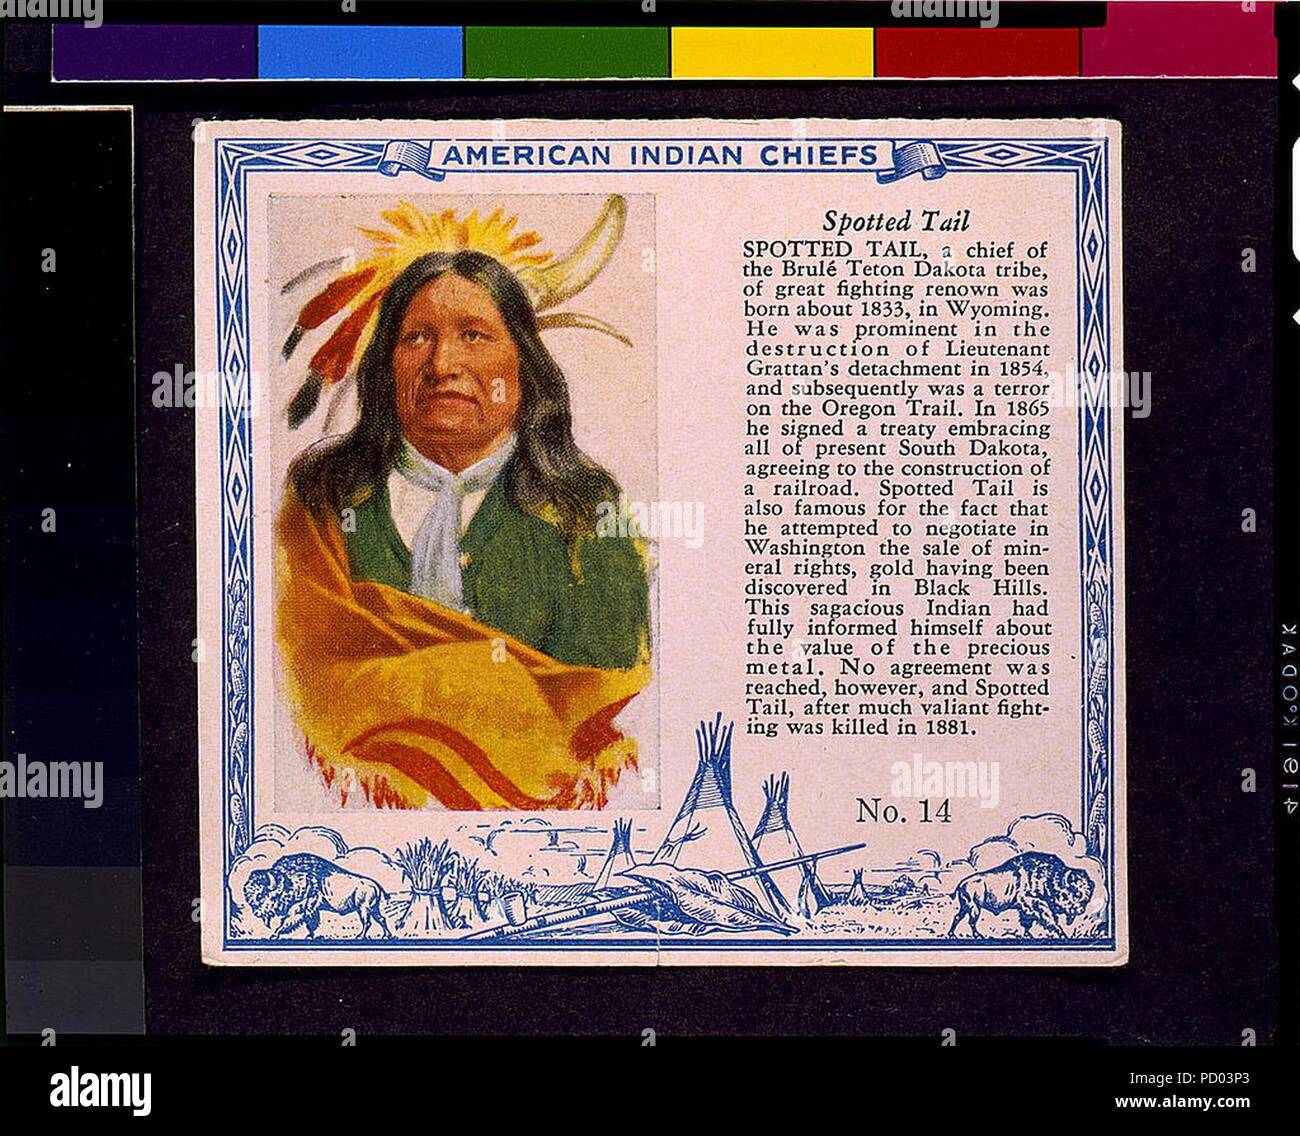 American Indian Chiefs. Spotted Tail Banque D'Images